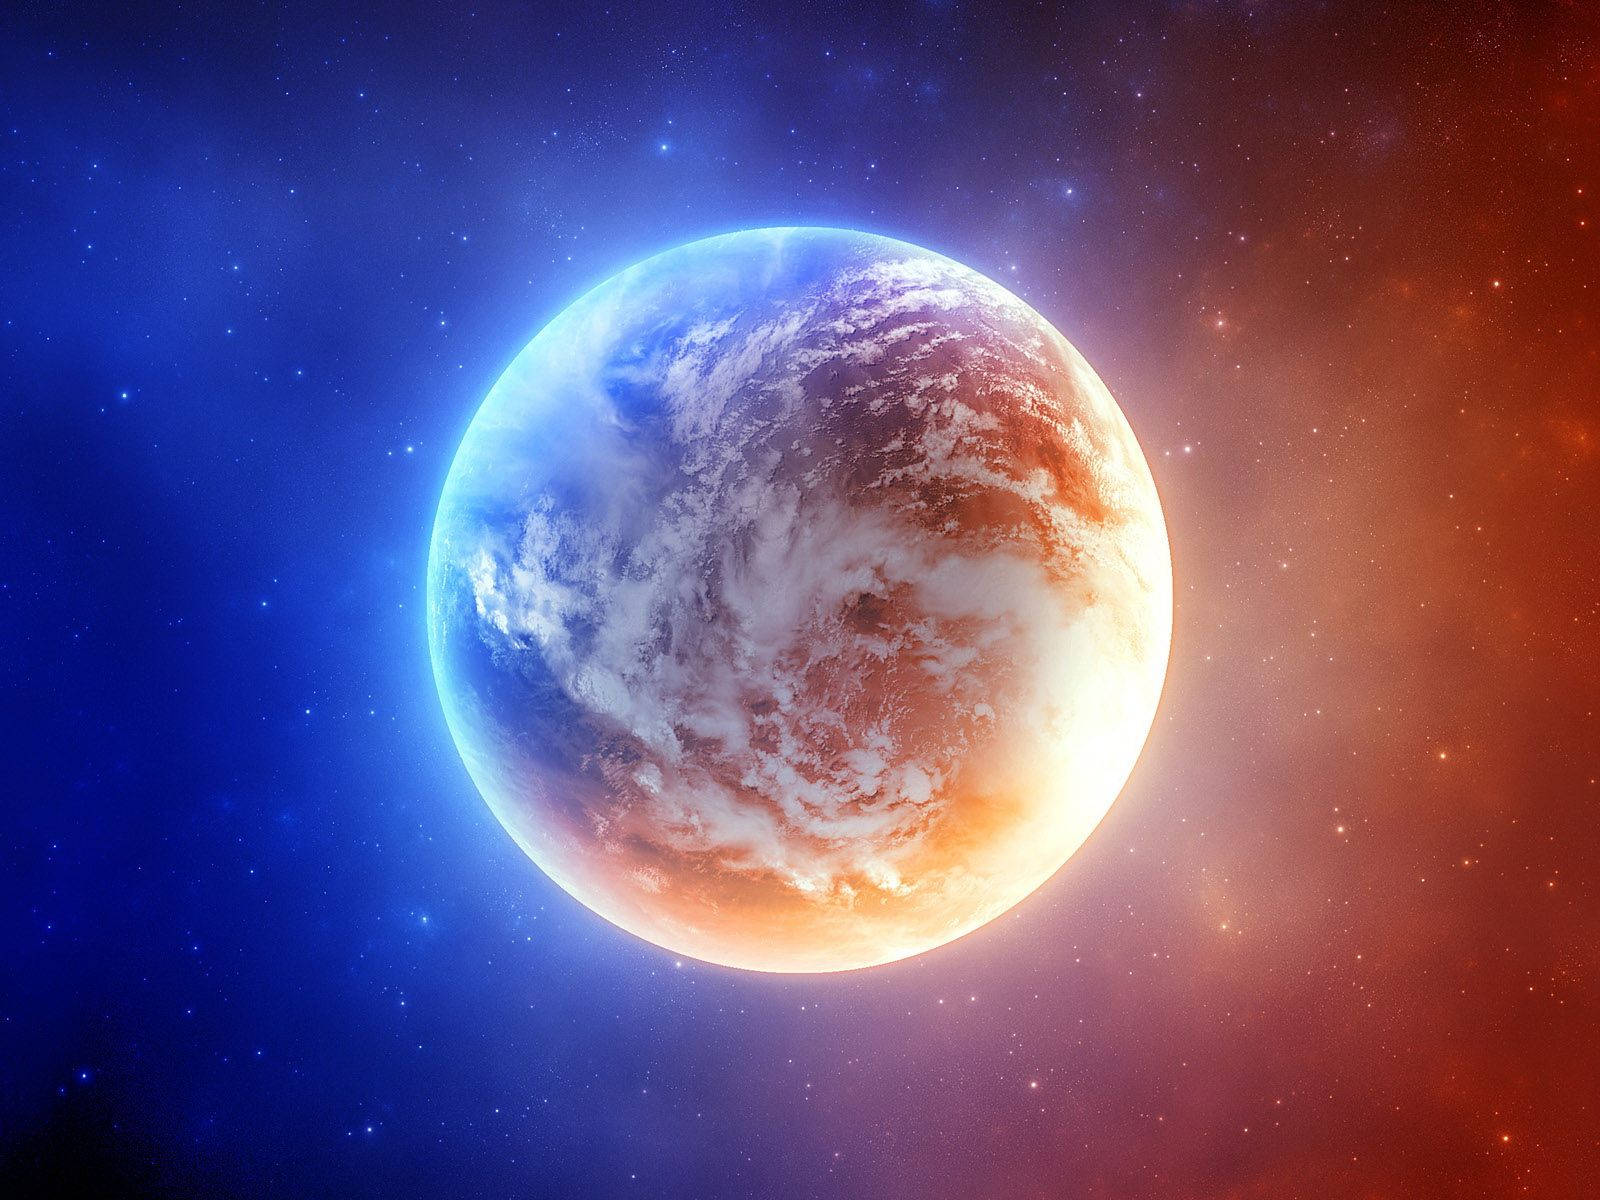 Celestial Artistry - A Beautiful Red And Blue Planet Wallpaper